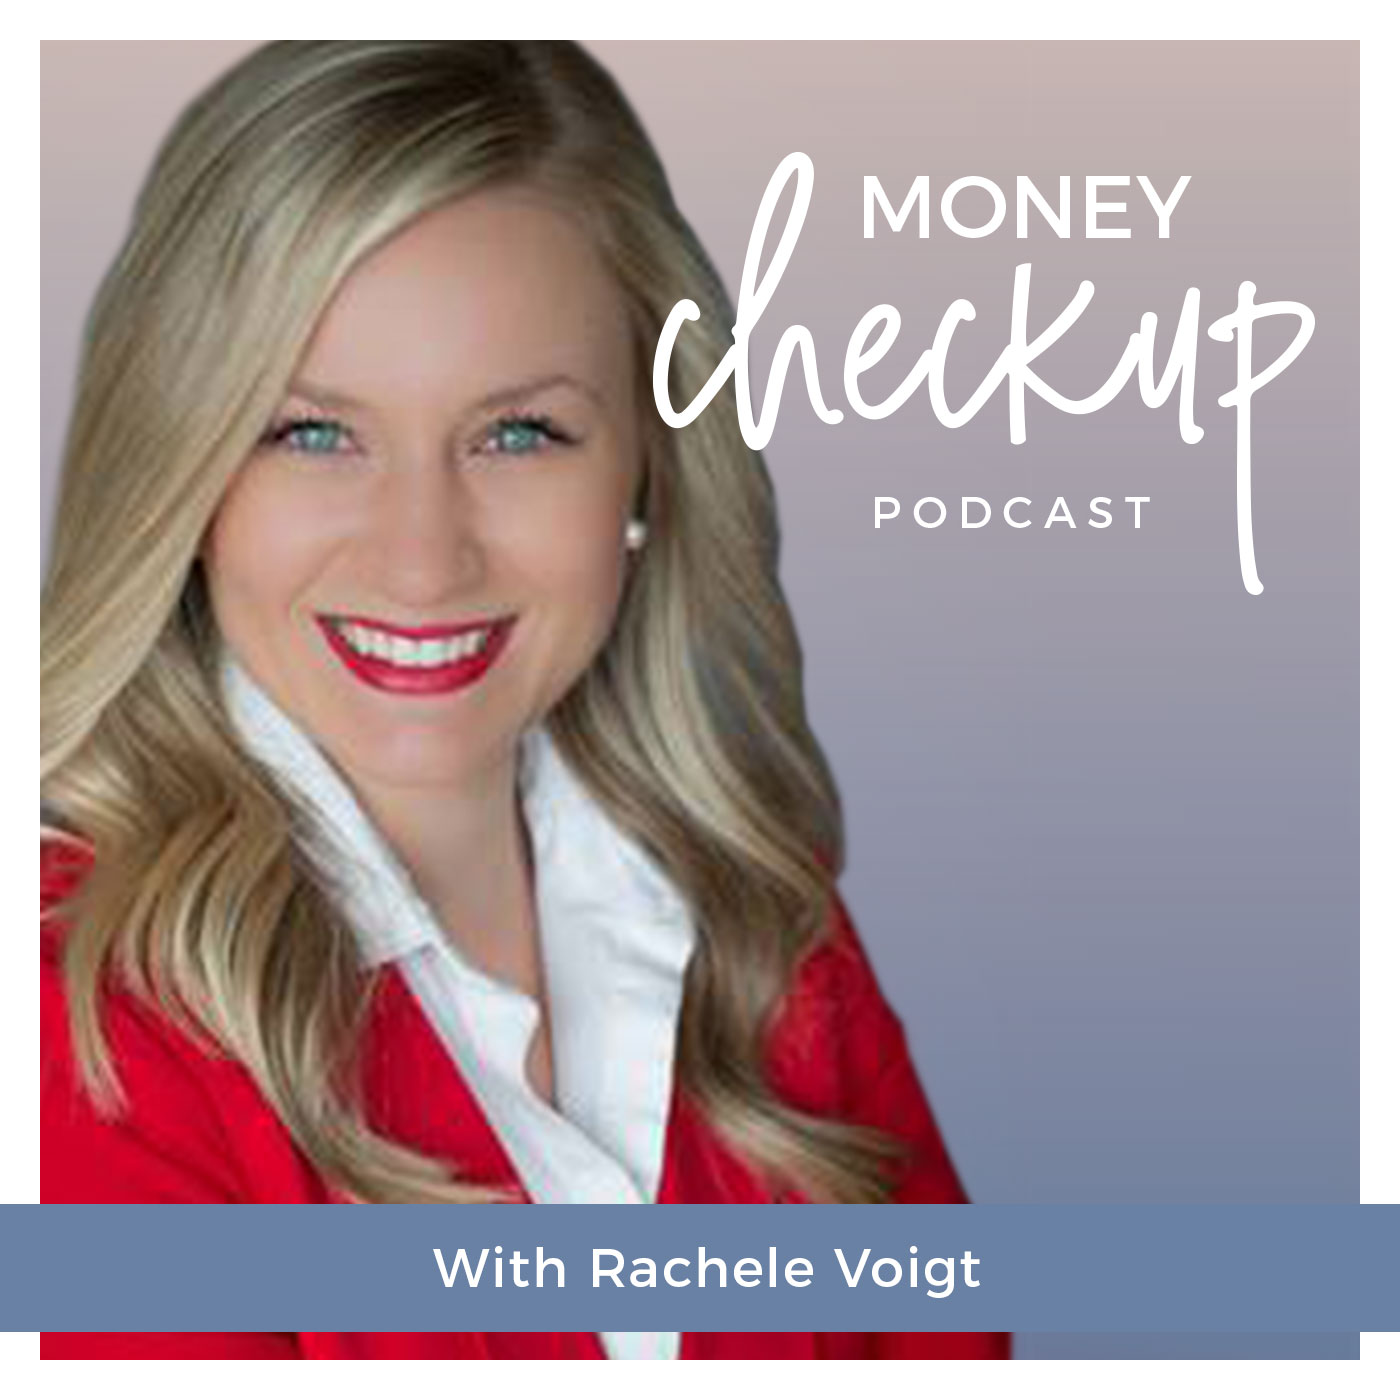 Money Checkup Podcast With Rachele Voigt